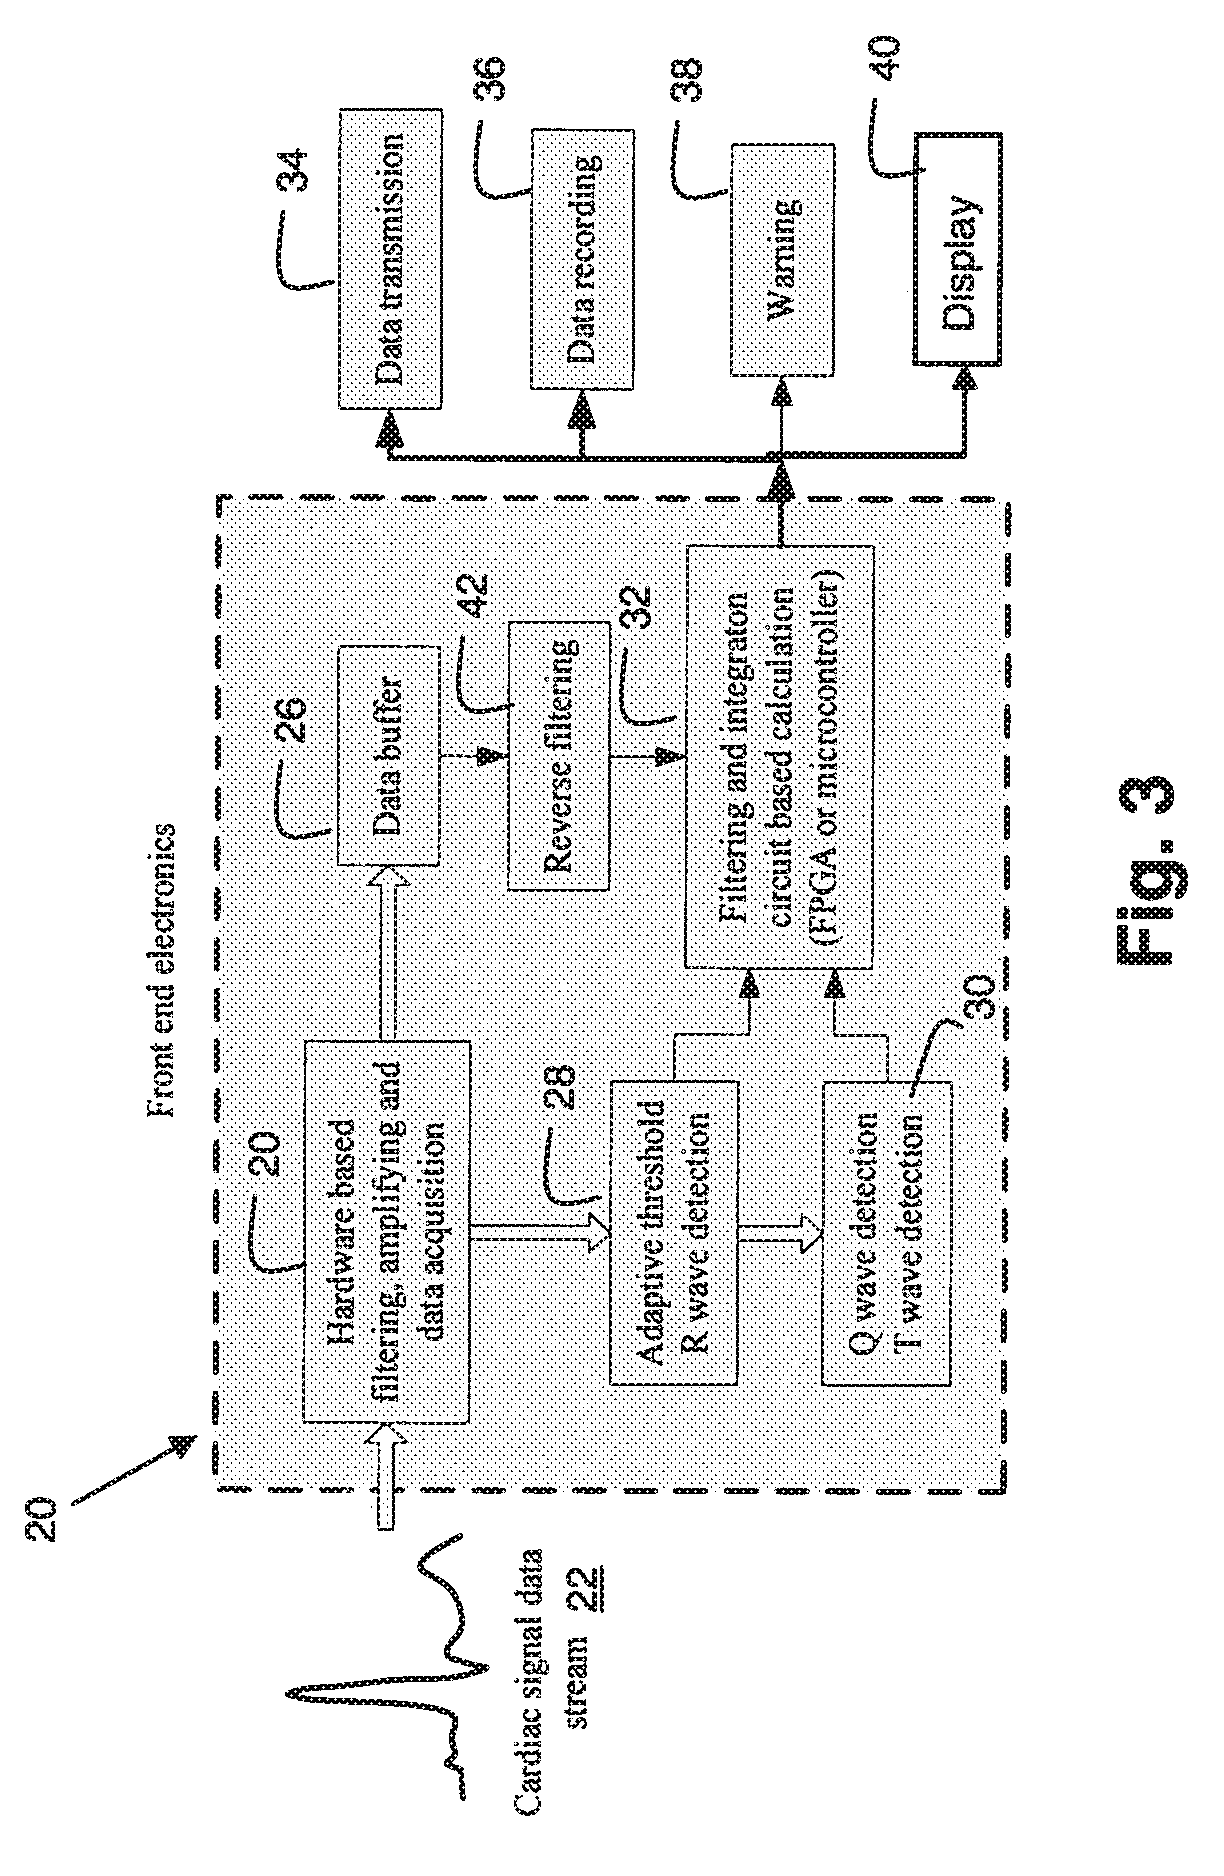 System for Cardiac Medical Condition Detection and Characterization